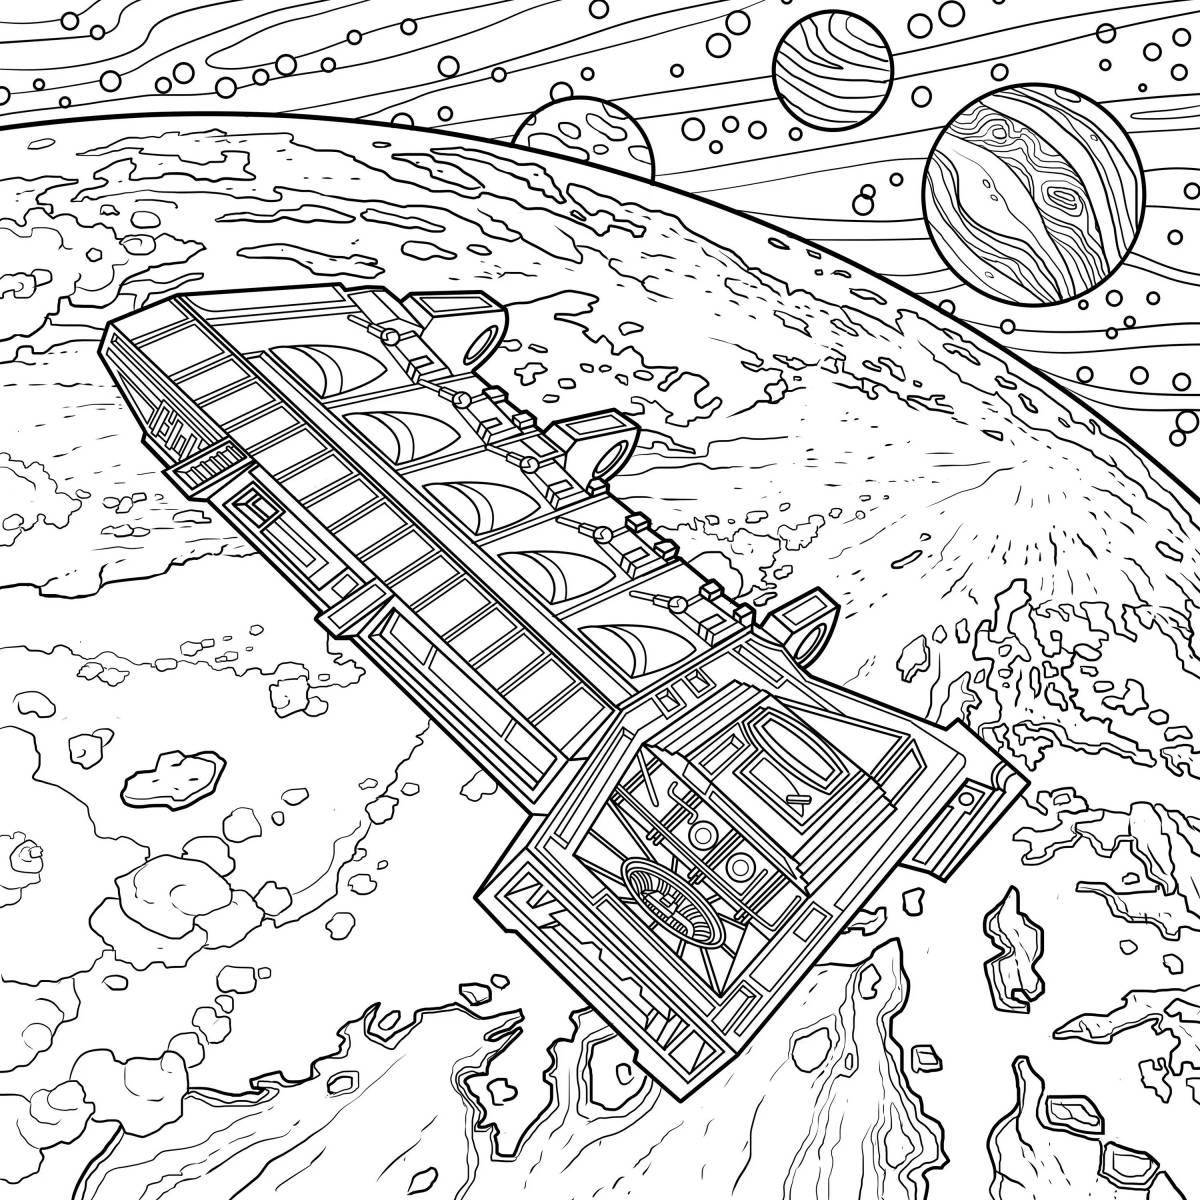 Exquisite space city coloring page